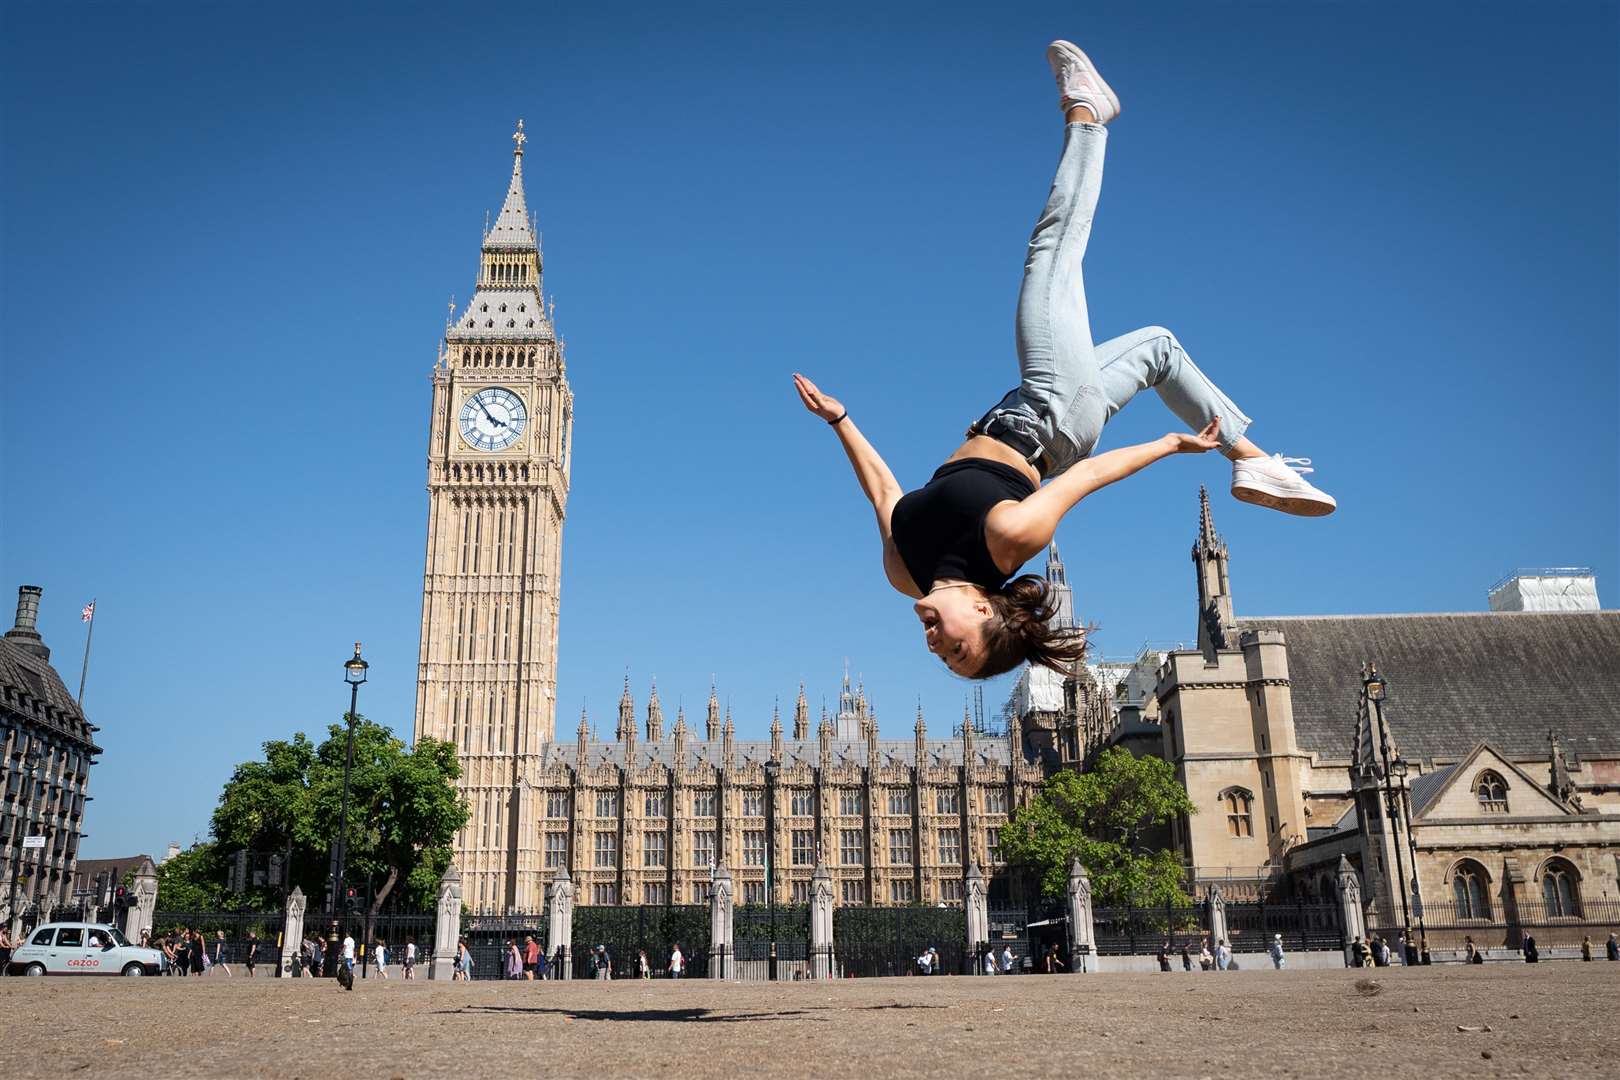 Trampolinist Nicole Steiner from Switzerland practices some moves on a dried out Parliament Square (Stefan Rousseau/PA)